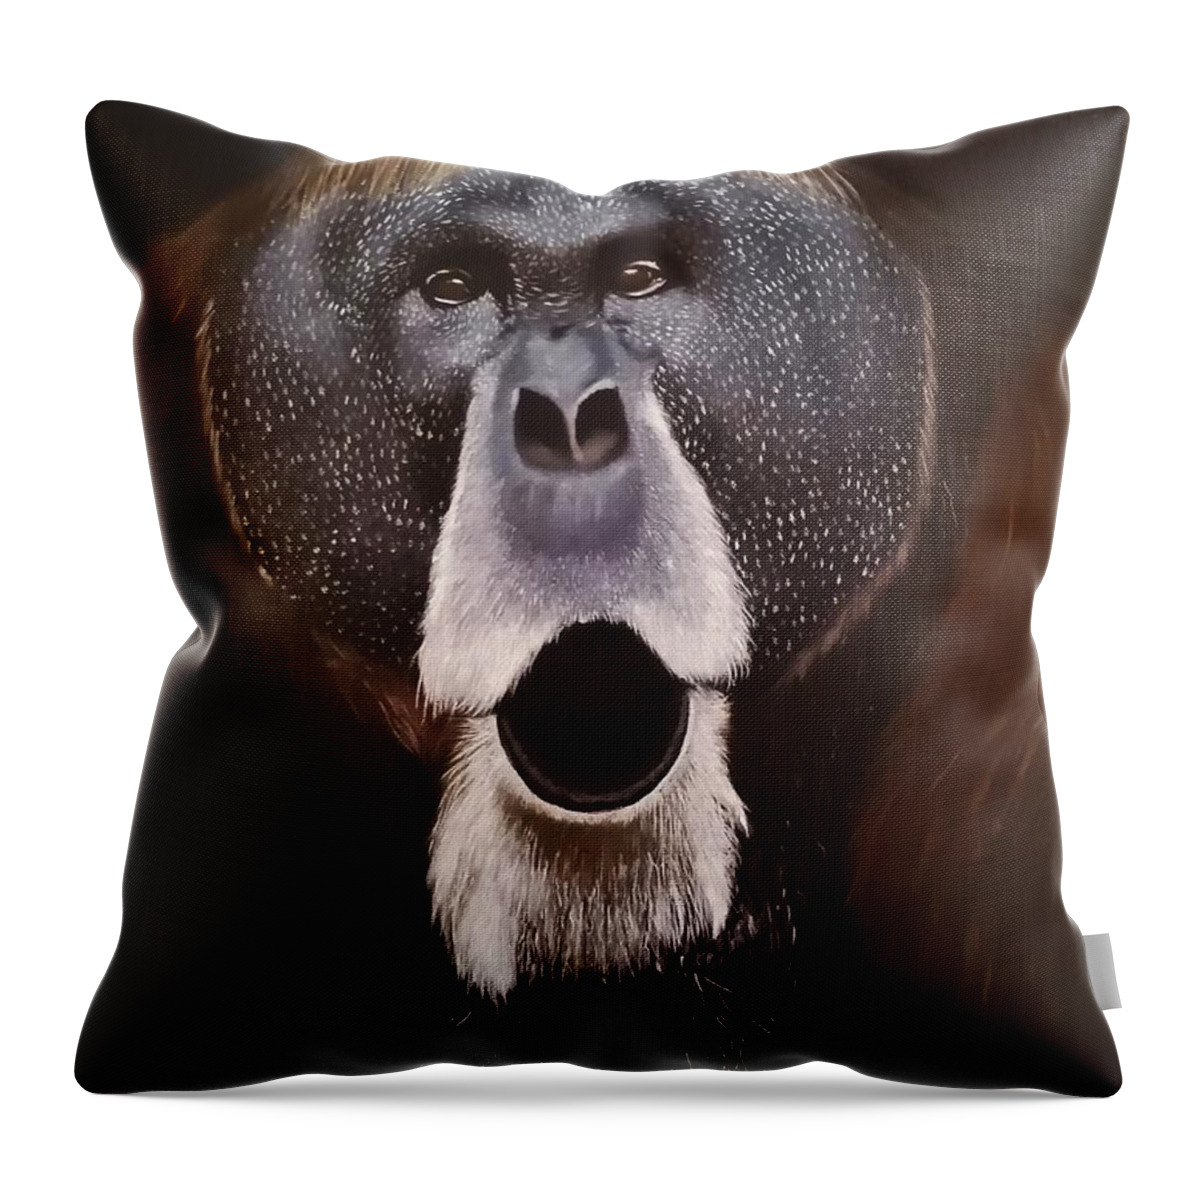 Orang Outang Throw Pillow featuring the painting Stupor by Jean Yves Crispo